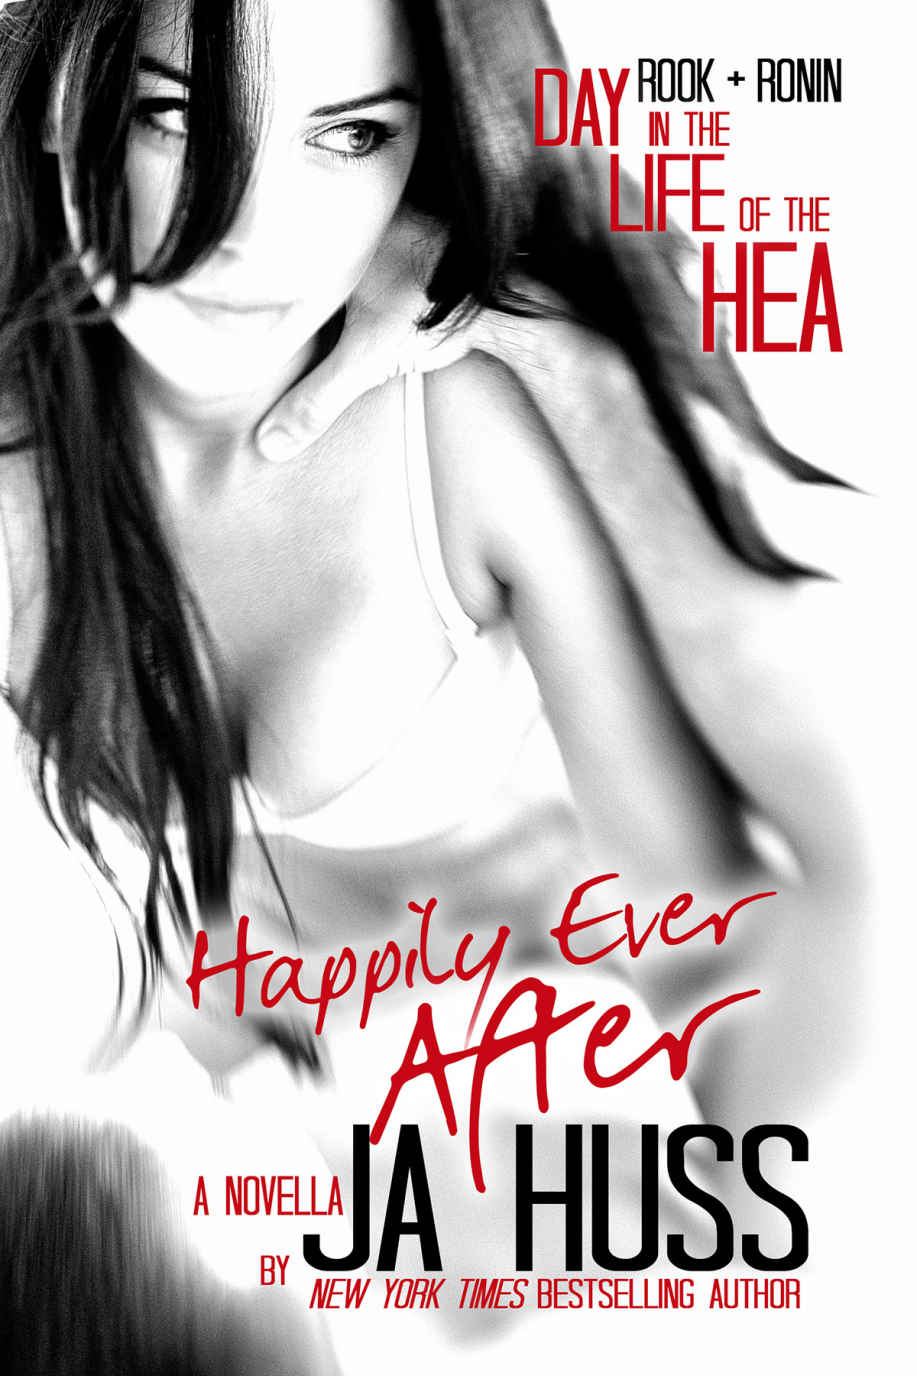 Happily Ever After: A Day in the Life of the HEA (Rook and Ronin #3.5) by J.A. Huss